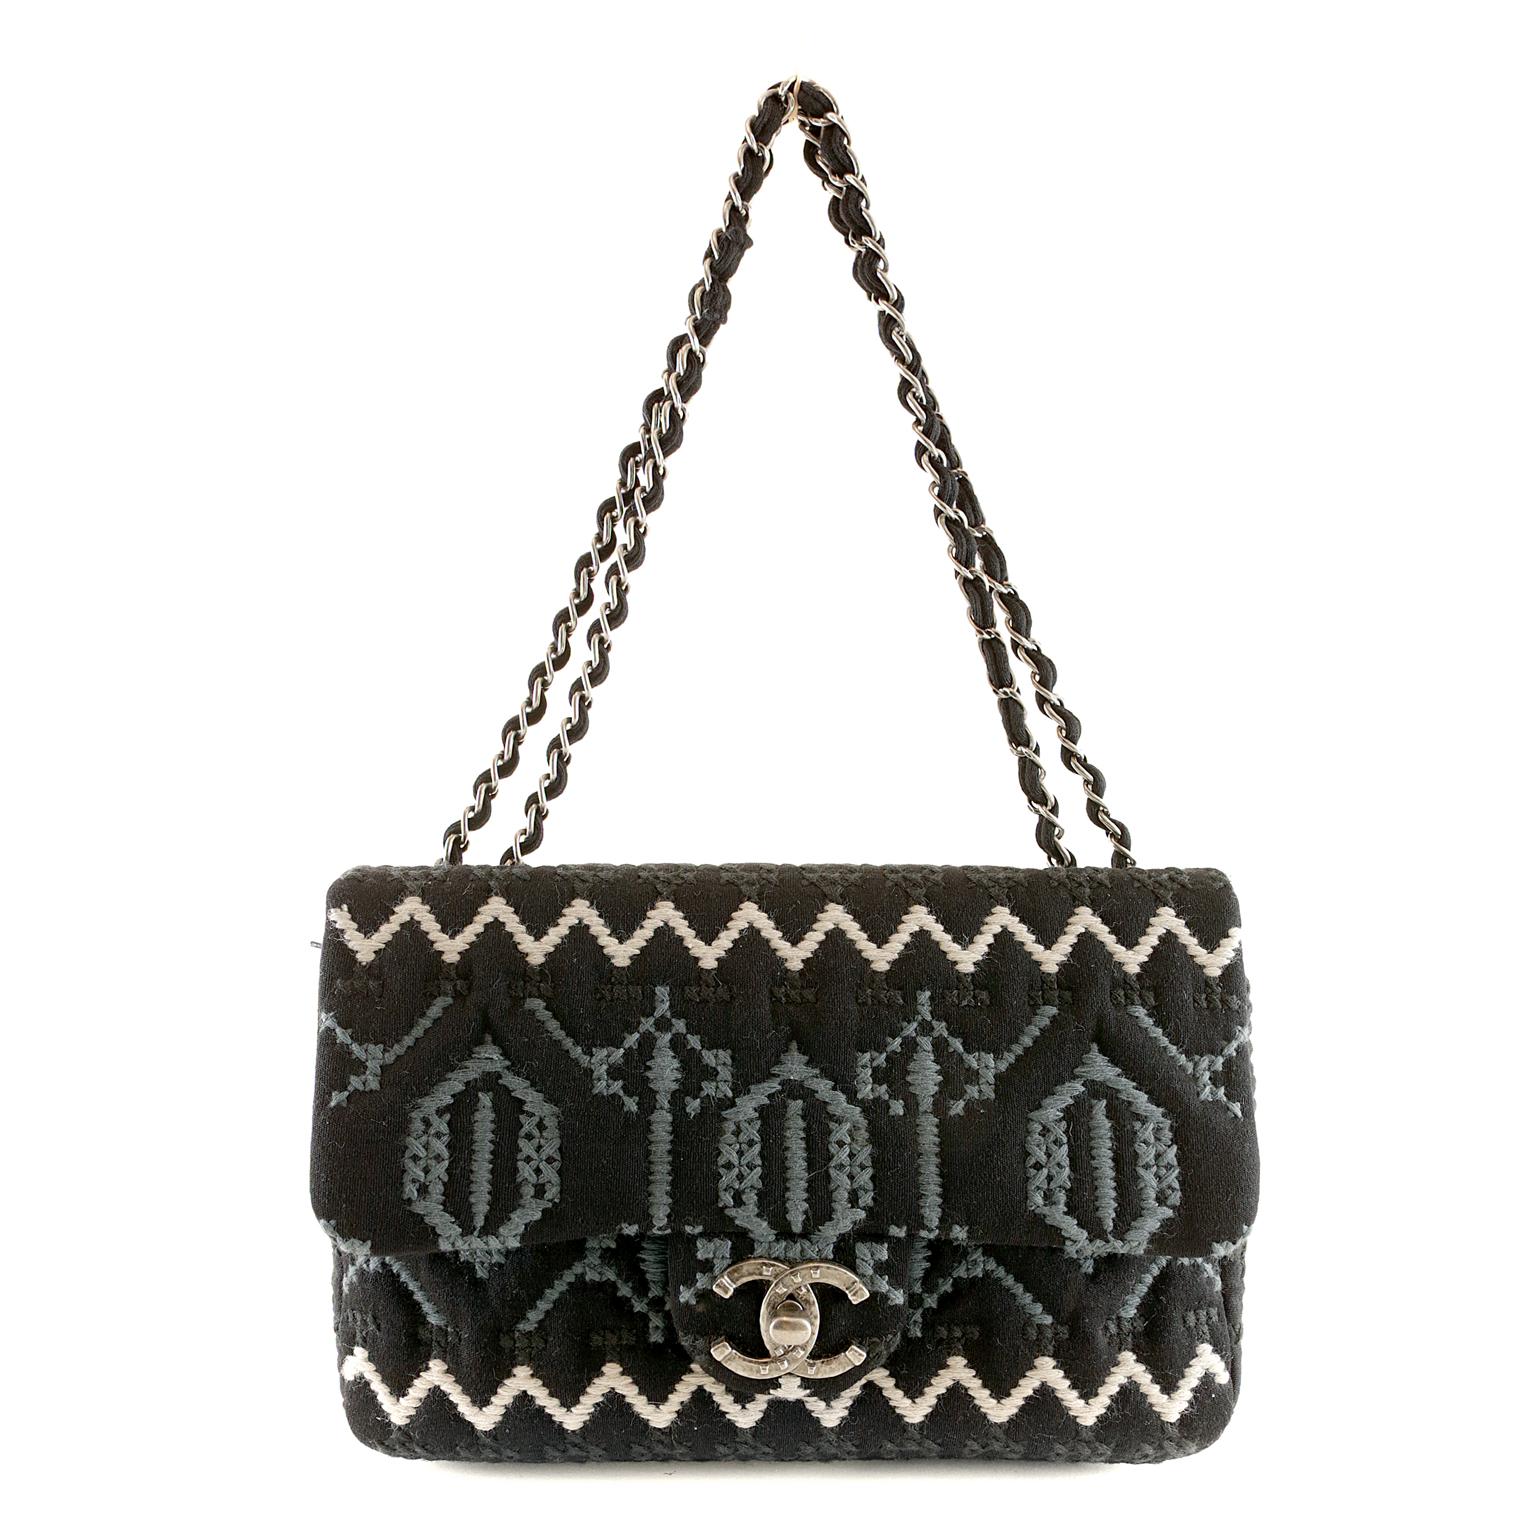 Chanel Black Jersey Embroidered Classic Flap Bag 5